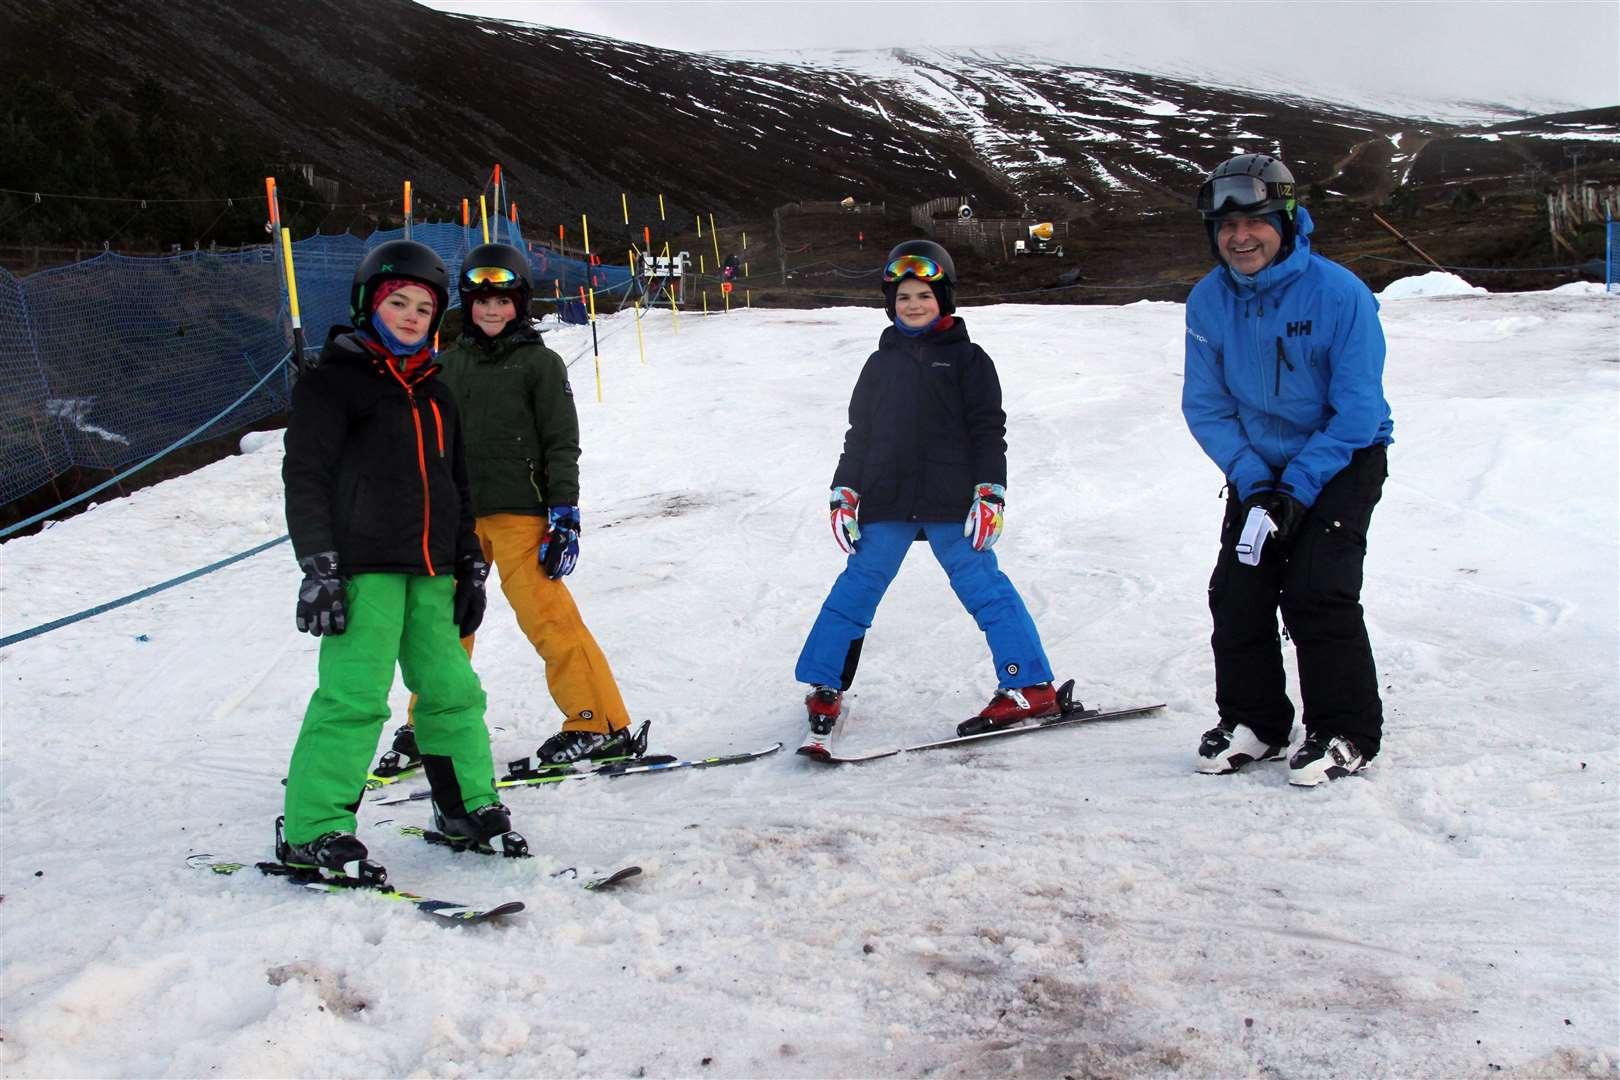 Wintersports still have a future at the resort and will remain whilst industry is 'viable'.